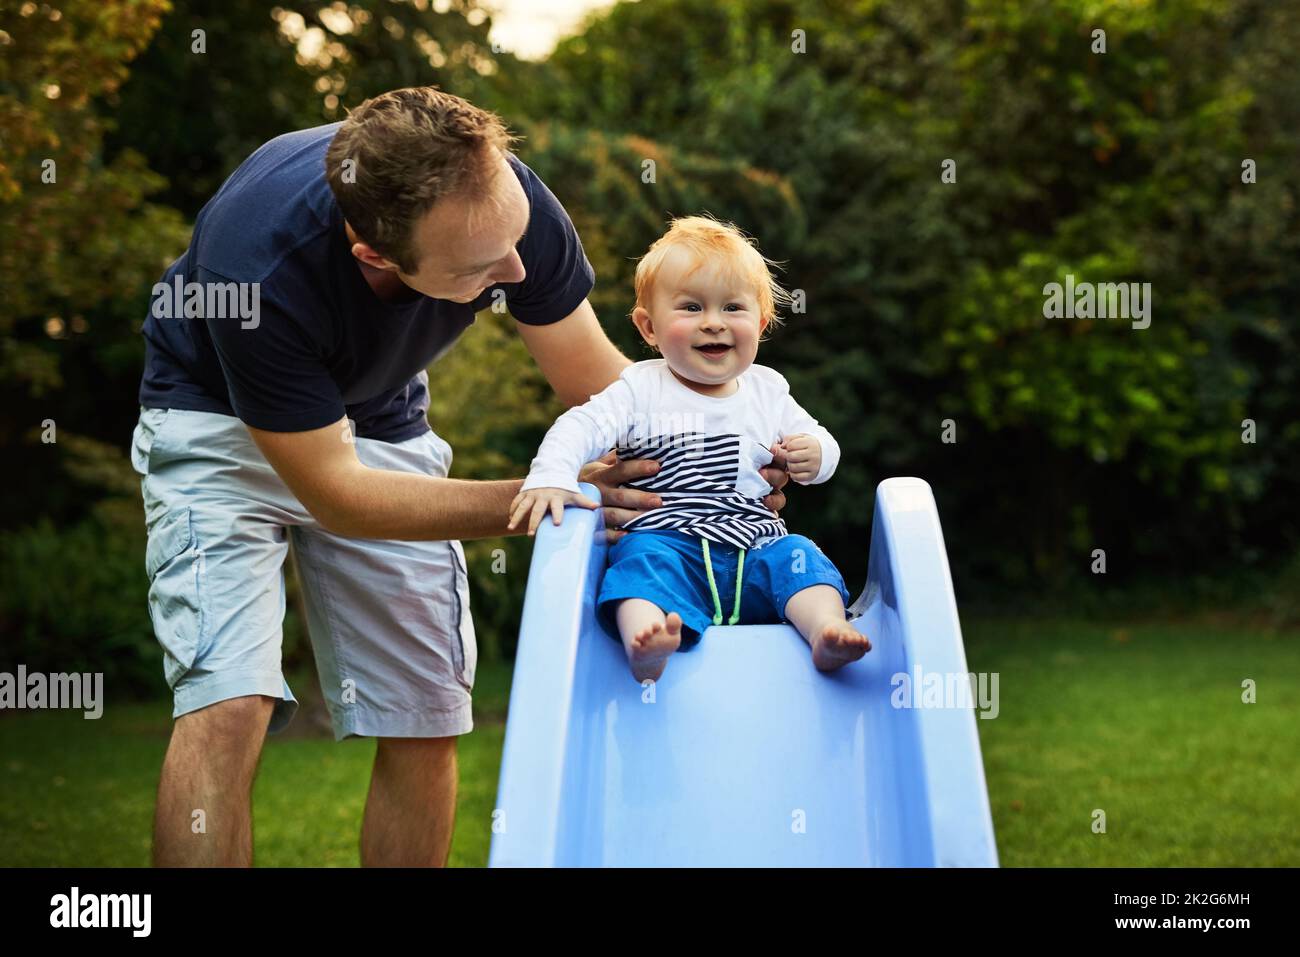 Daddys helping me slide. Shot of an adorable little boy and his father playing in the backyard. Stock Photo